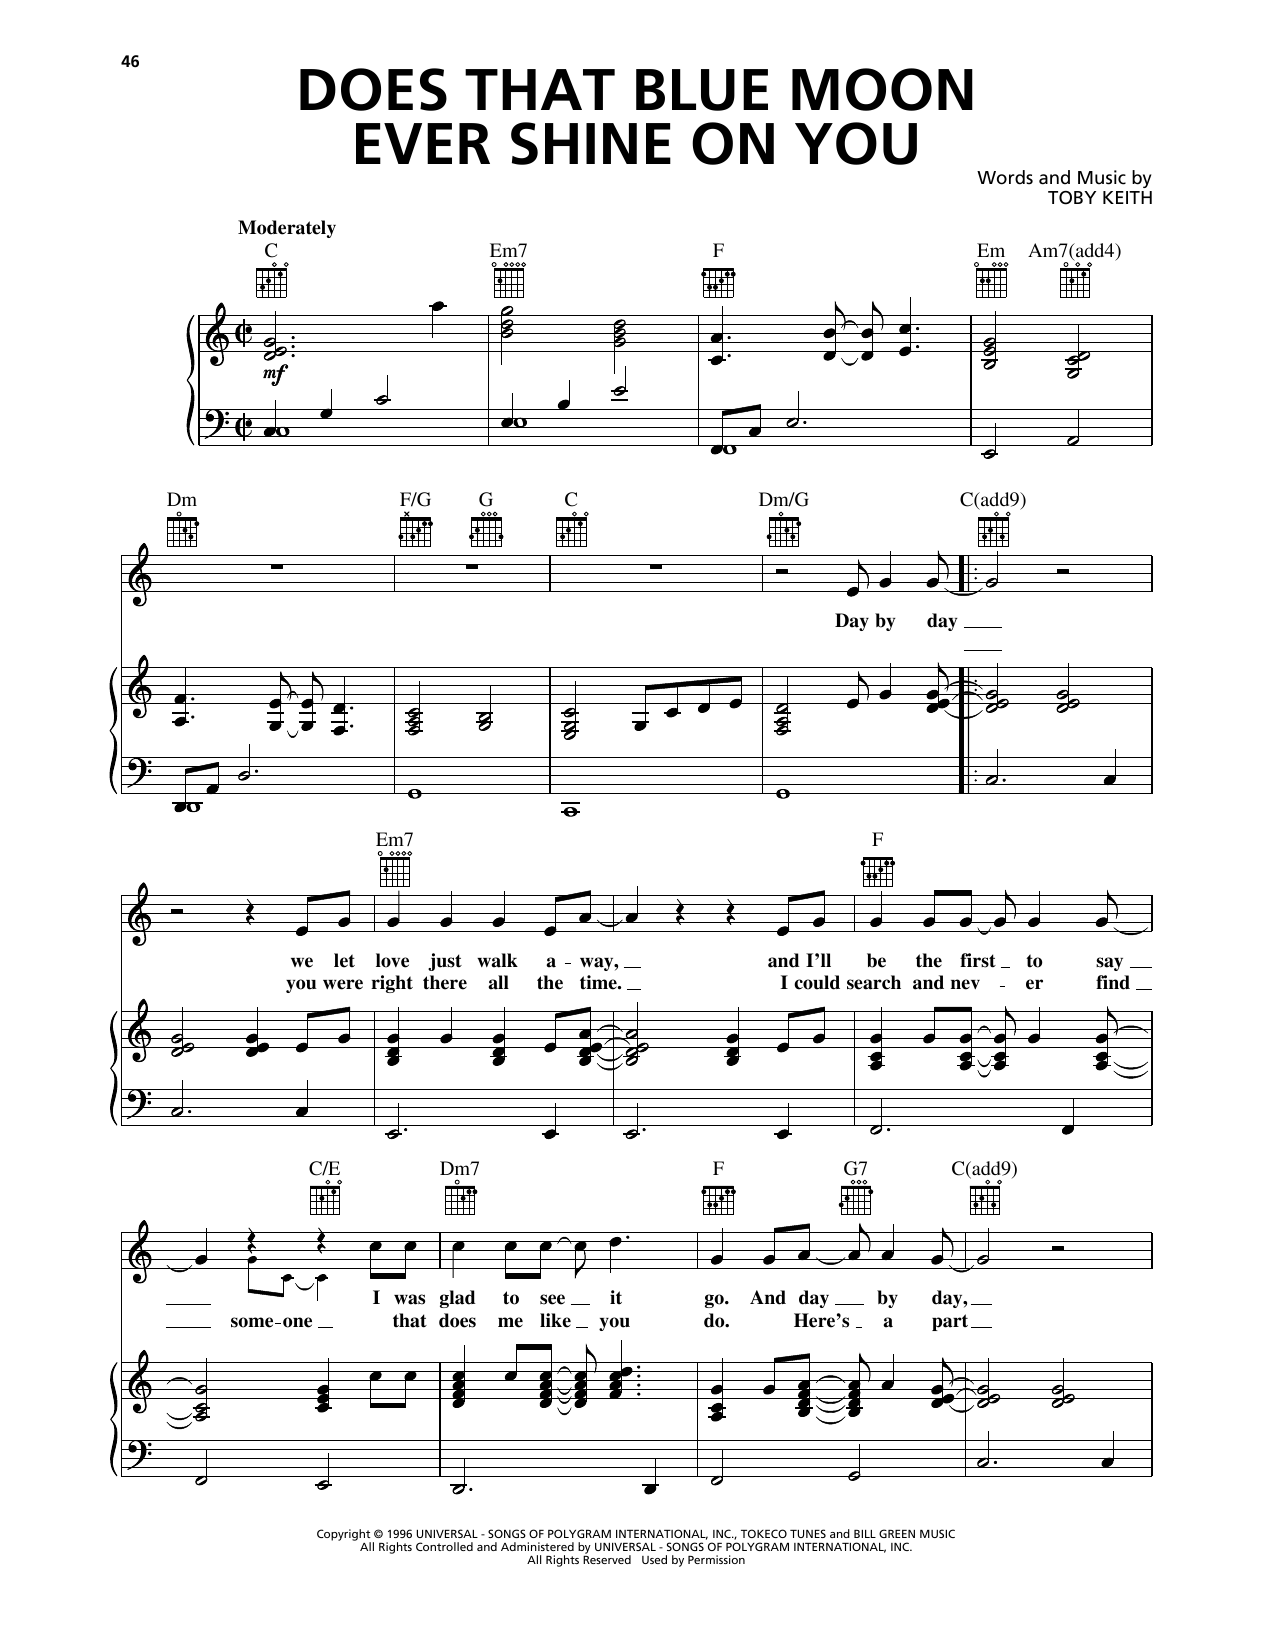 Download Toby Keith Does That Blue Moon Ever Shine On You Sheet Music